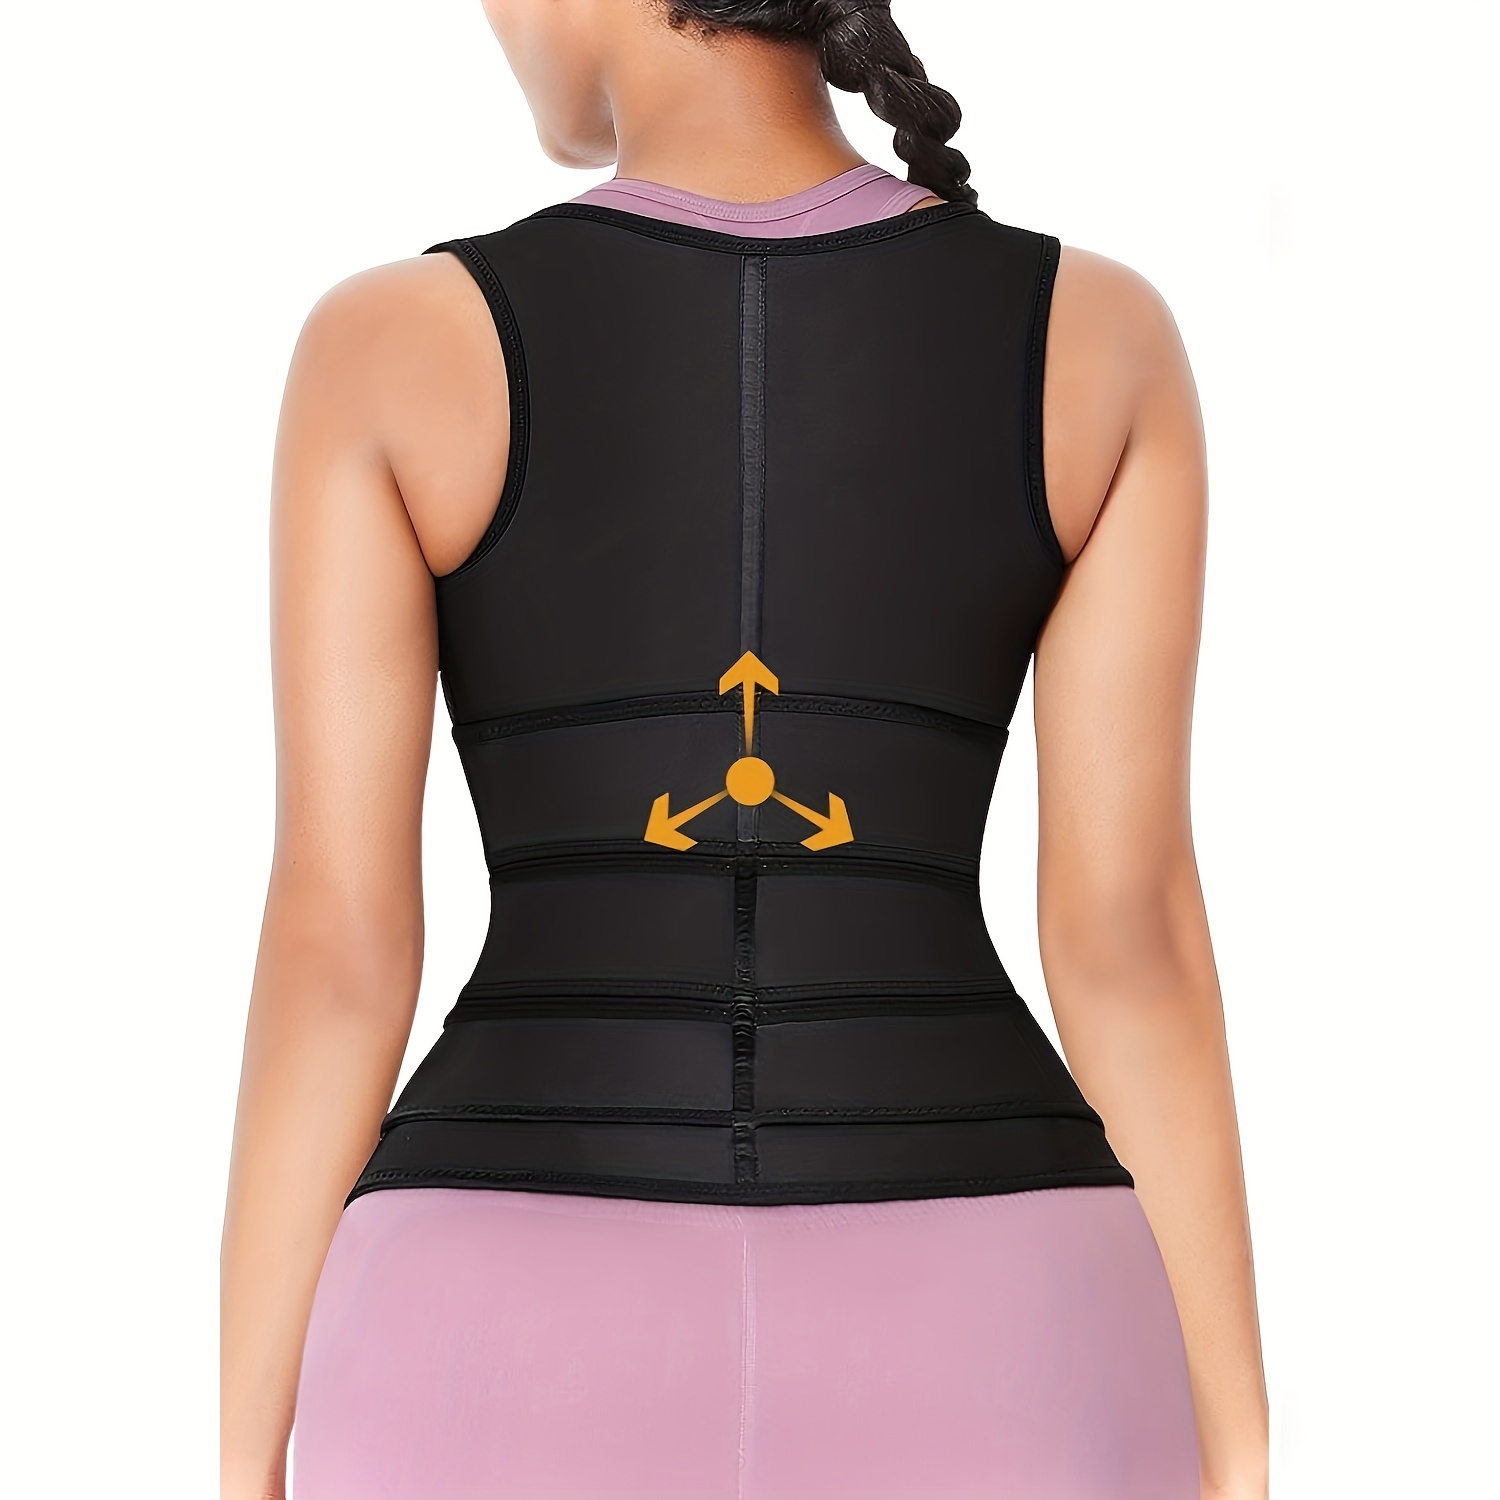 Breathable Waist Trainer Corset For Weight Loss Vest For Women